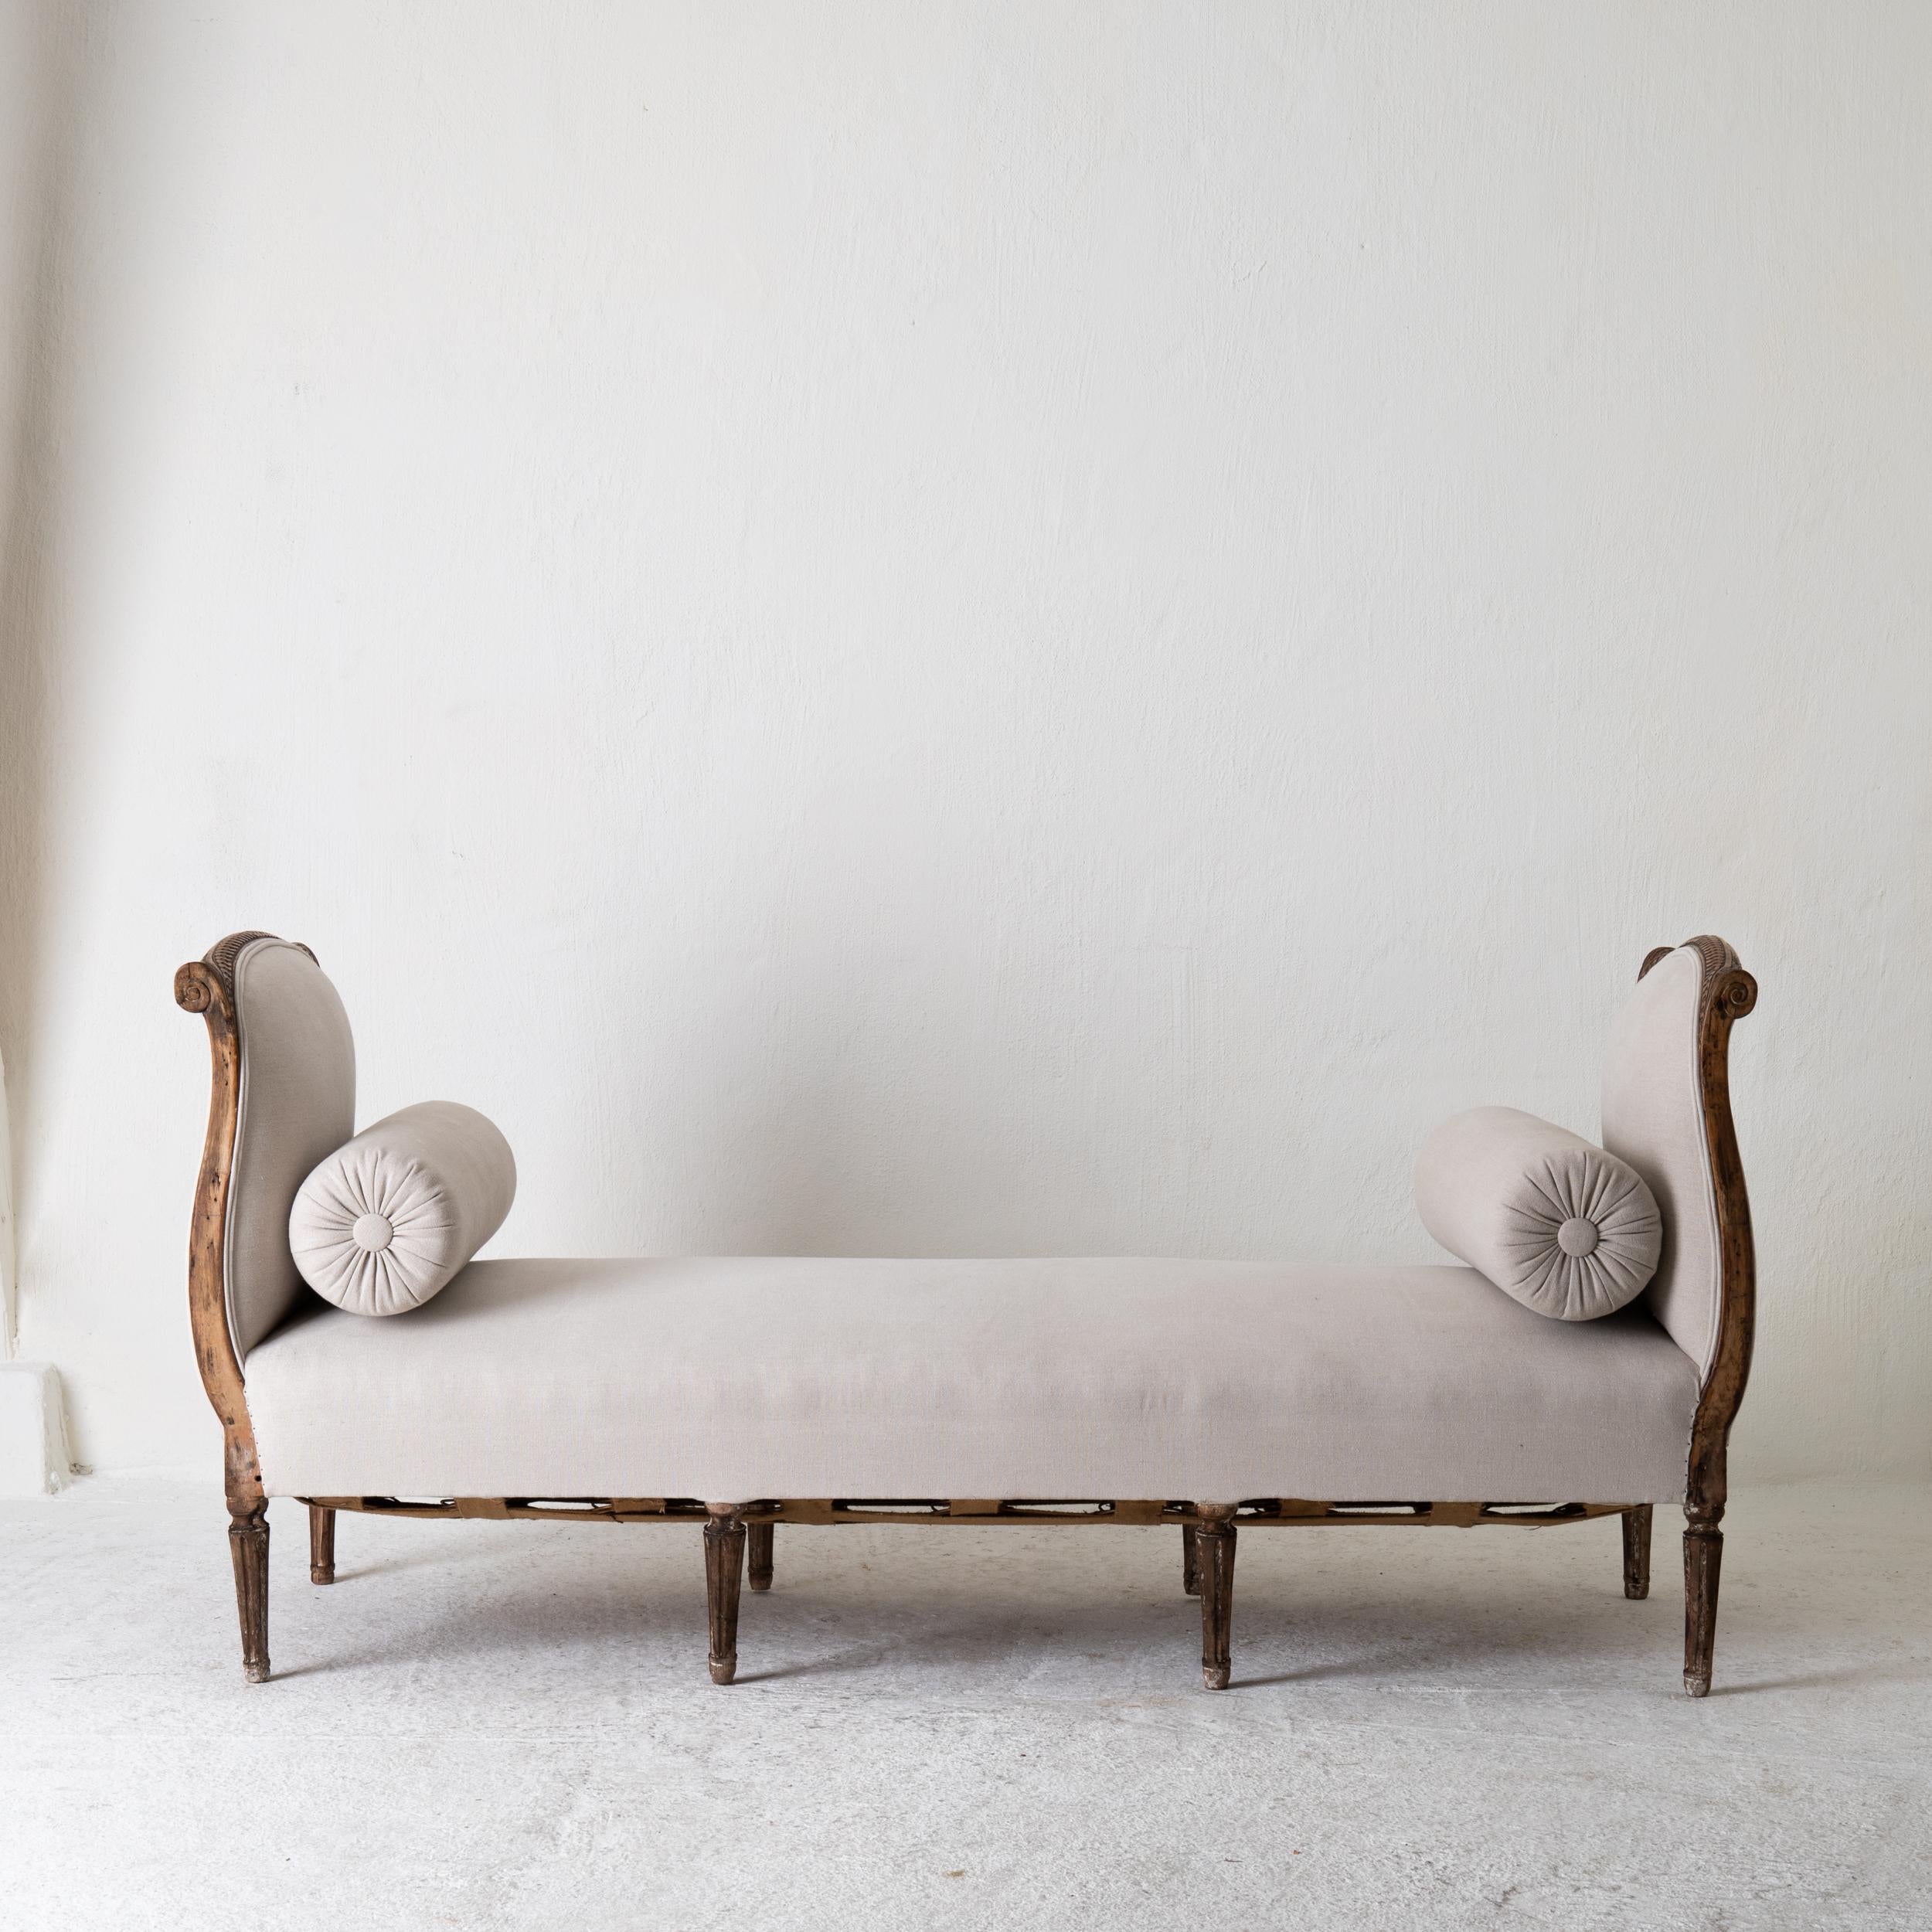 Daybed Swedish Gustavian 1780-1800 brown linen, Sweden. A daybed made during the early part of the Gustavian period in Sweden, 1780-1800. Frame made from dark stained wood carved with ribbon beading and flowers. Rounded and channeled legs.